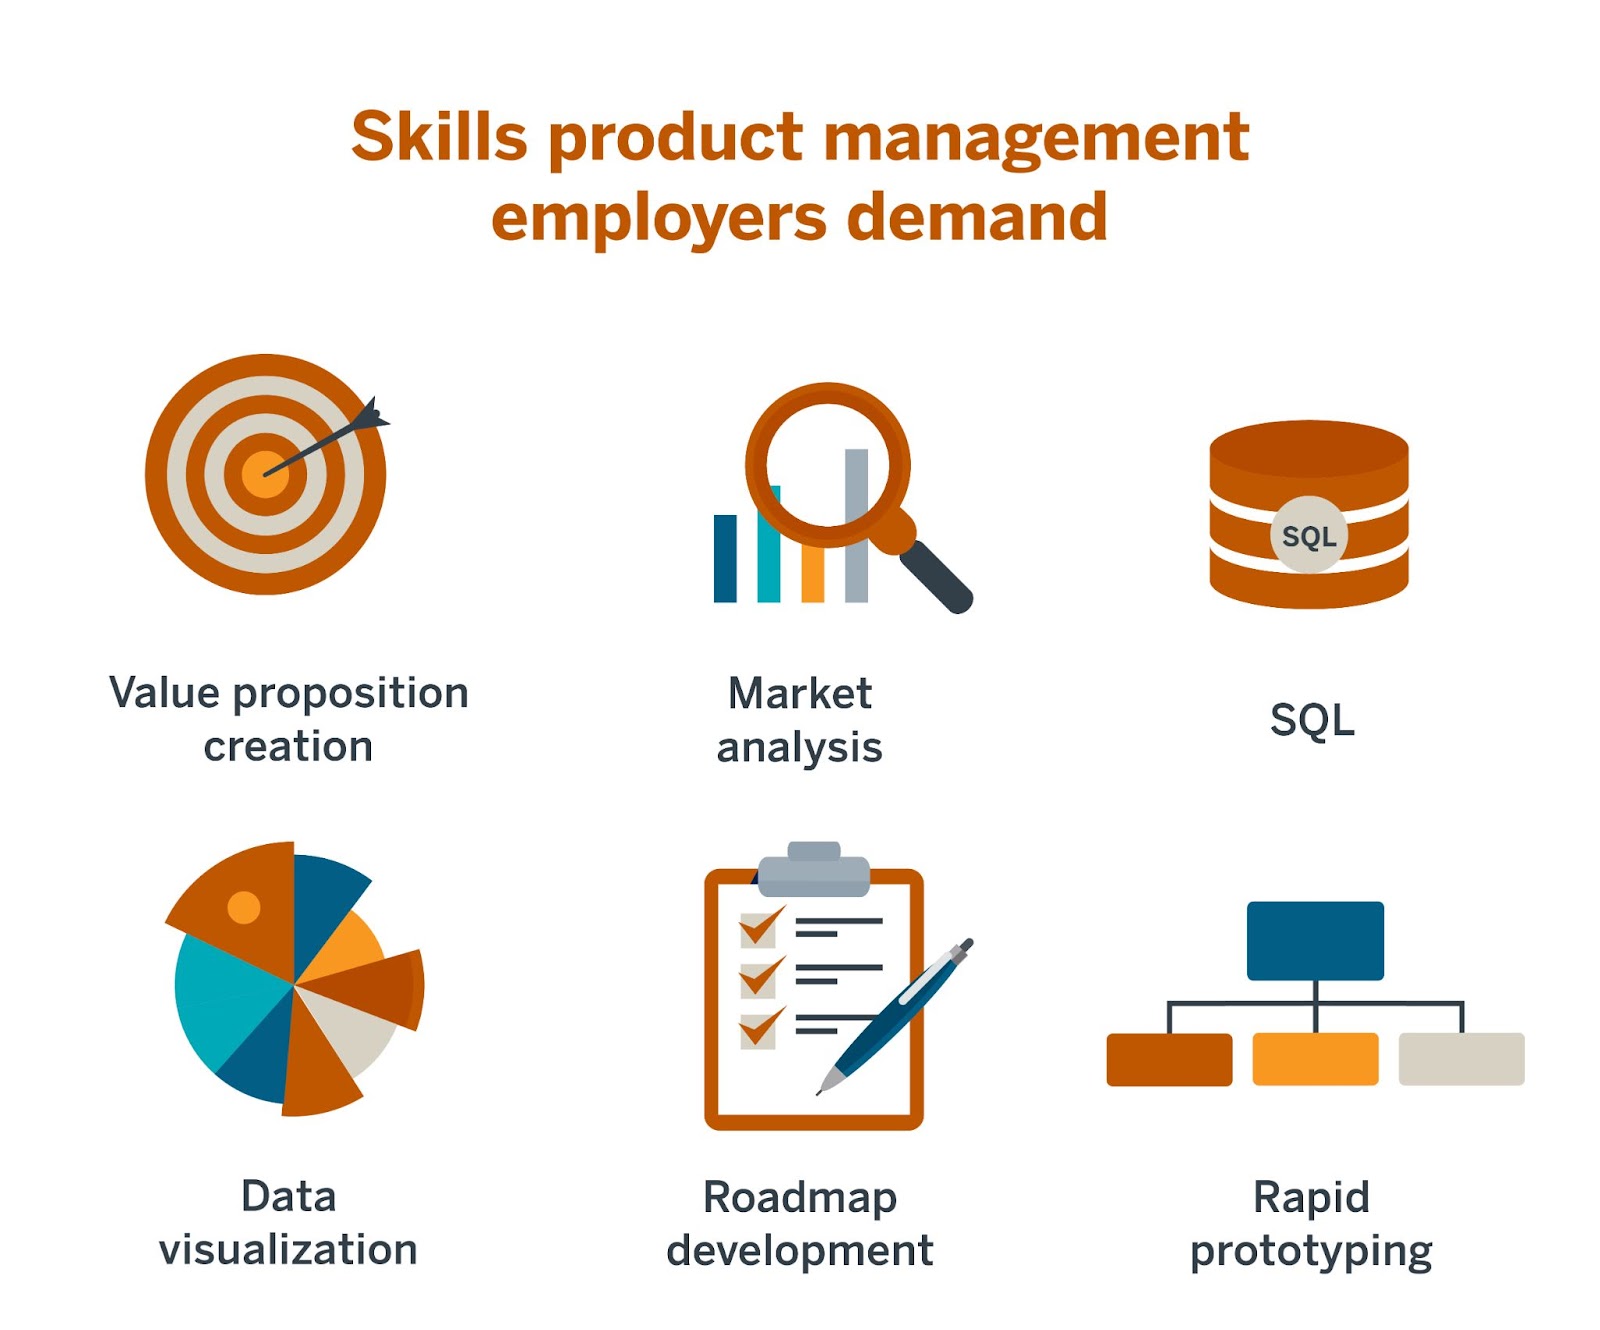 An image that highlights the skills product management employers demand.